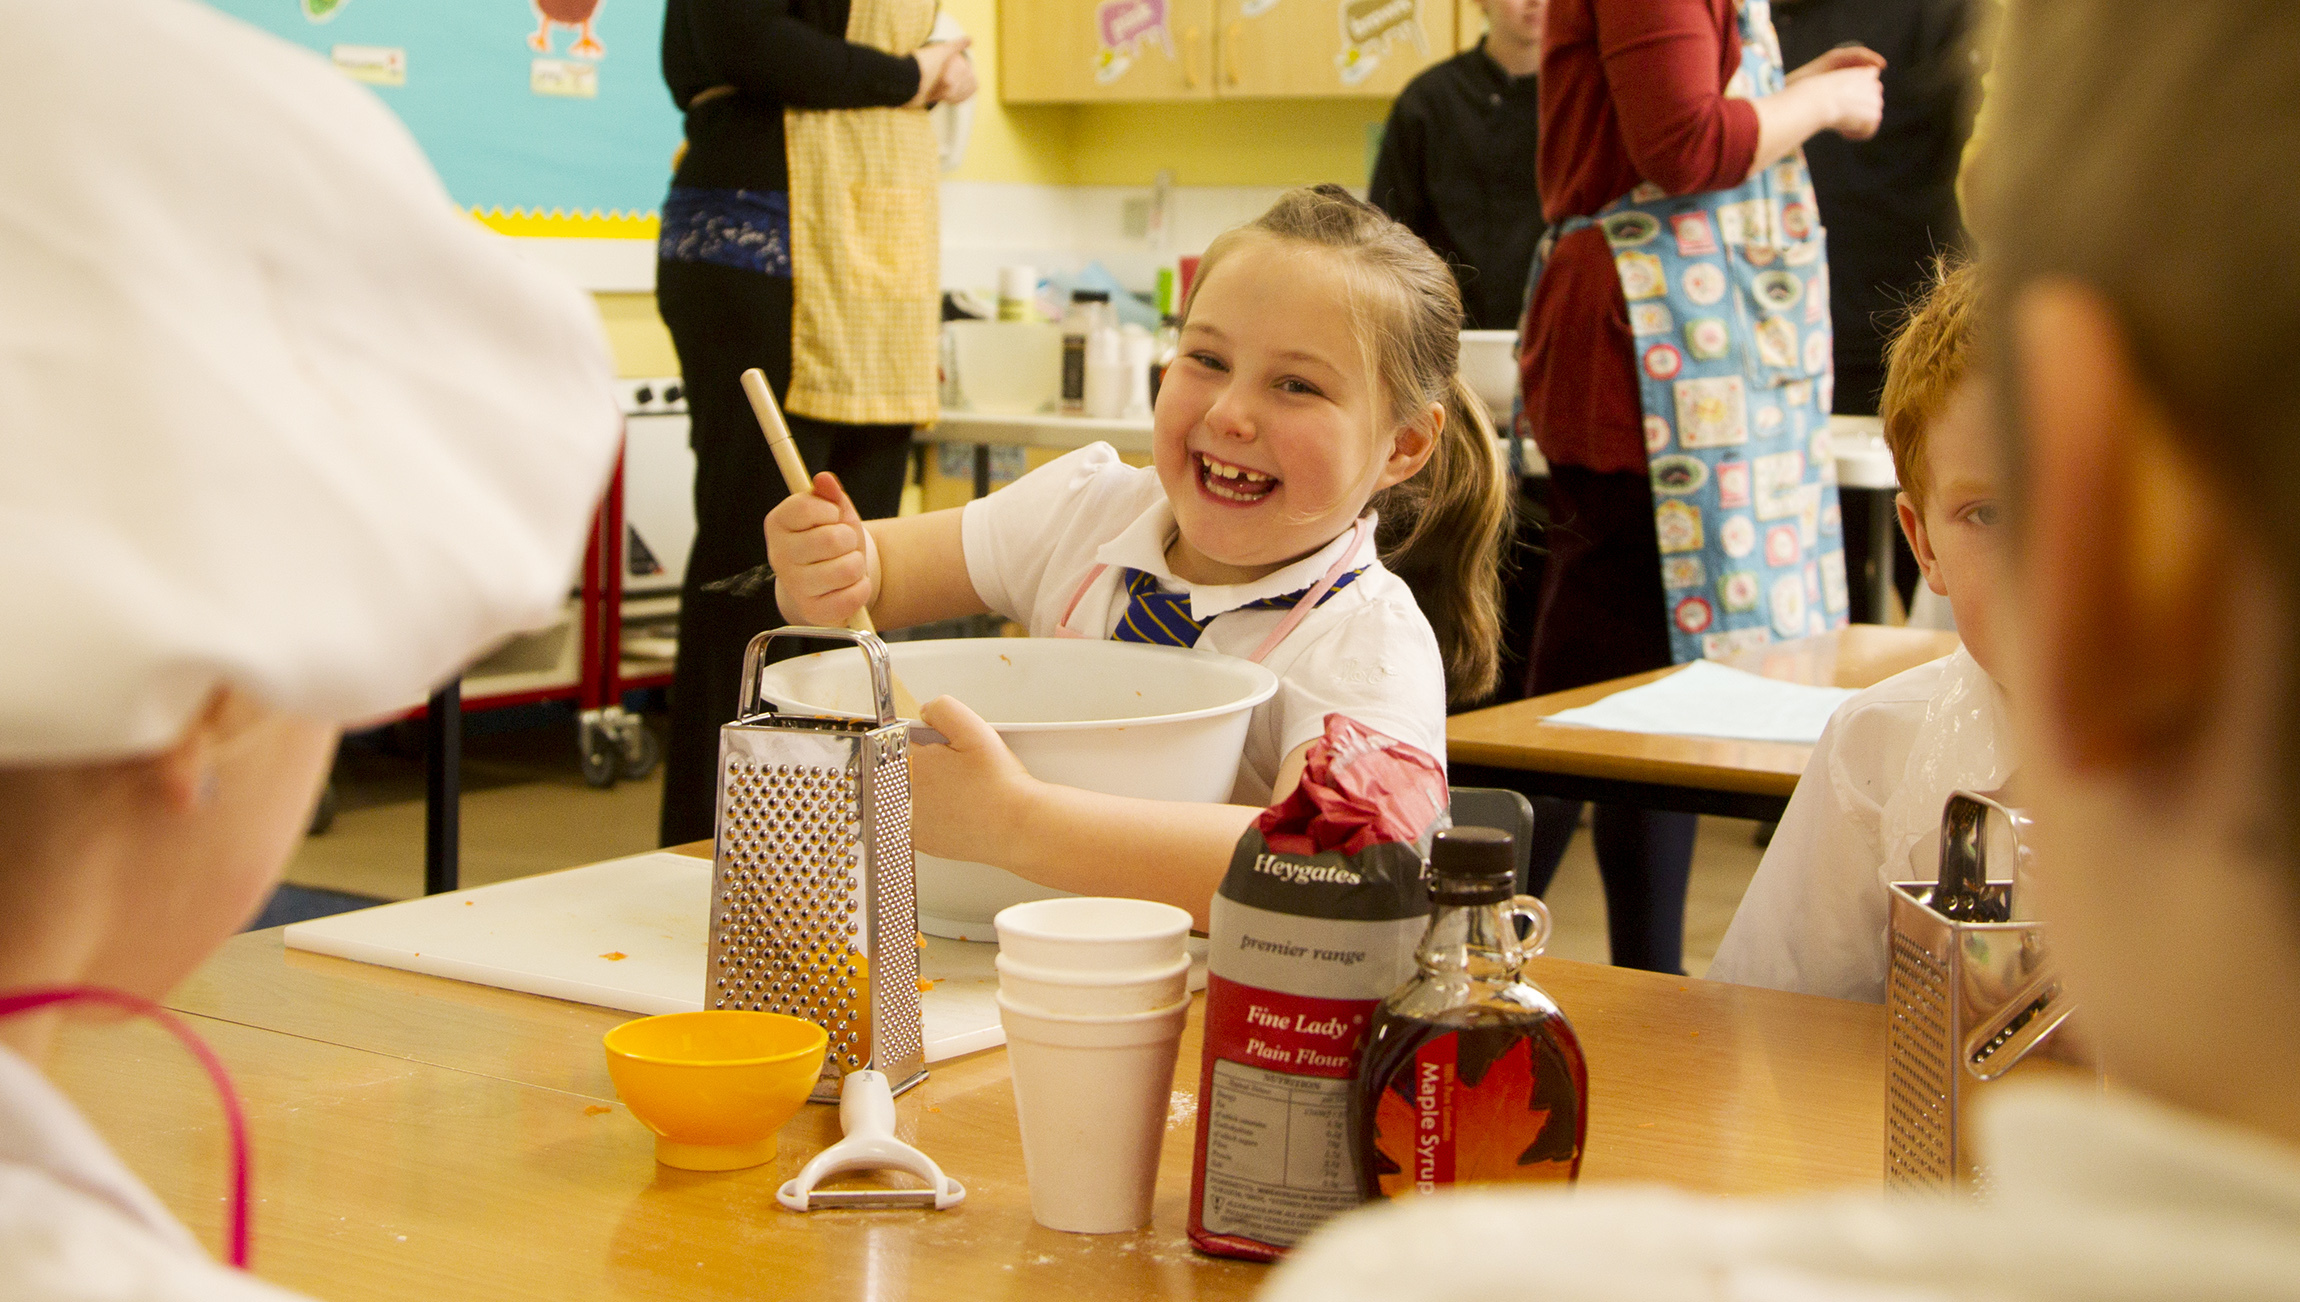 Ready, steady, bake: pupils from the north compete in bake-off